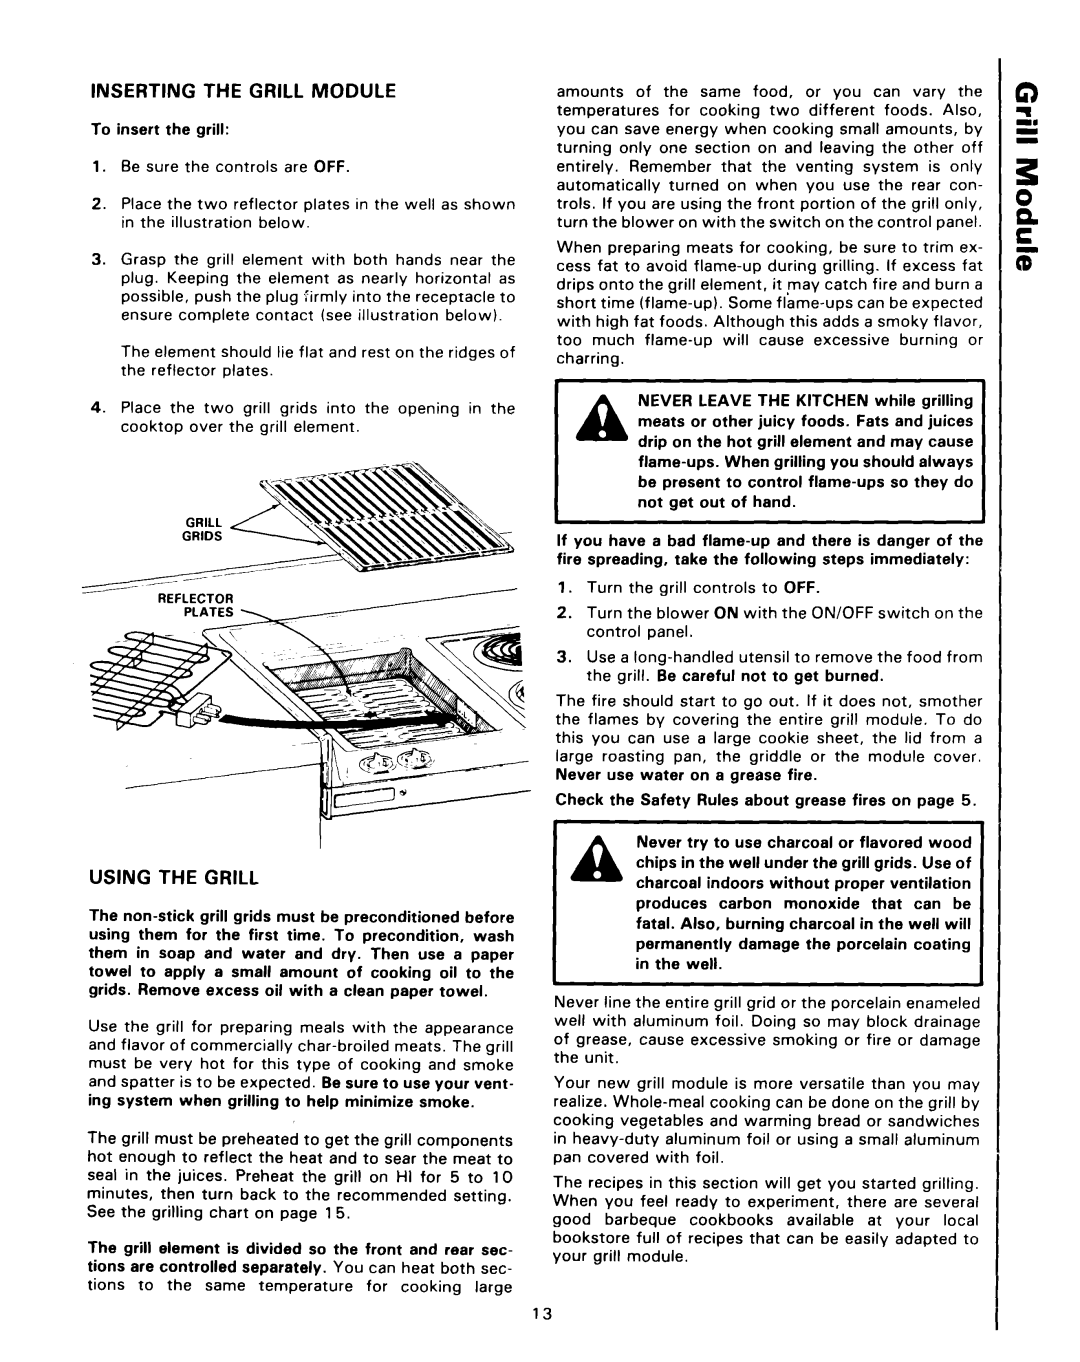 Roper 4347928 (333240-1) manual Inserting The Grill Module, Using The Grill 